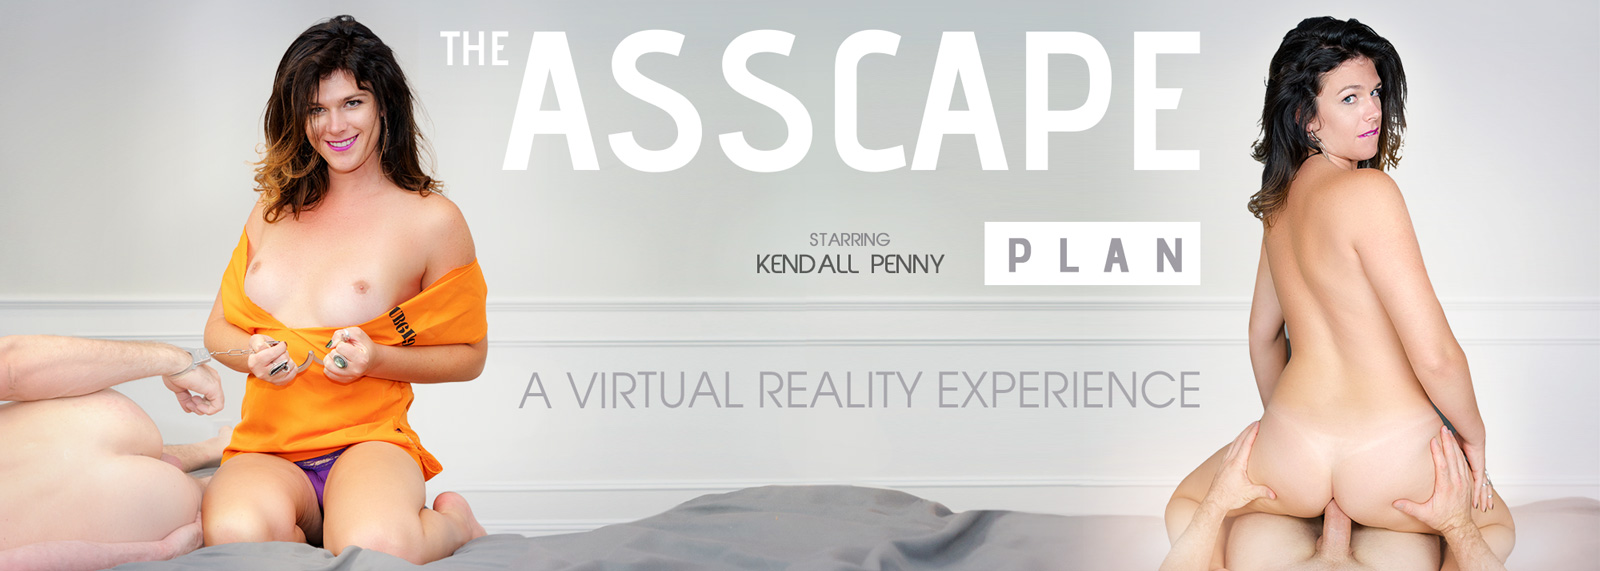 The Asscape Plan - VR Porn Video, Starring: Kendall Penny VR